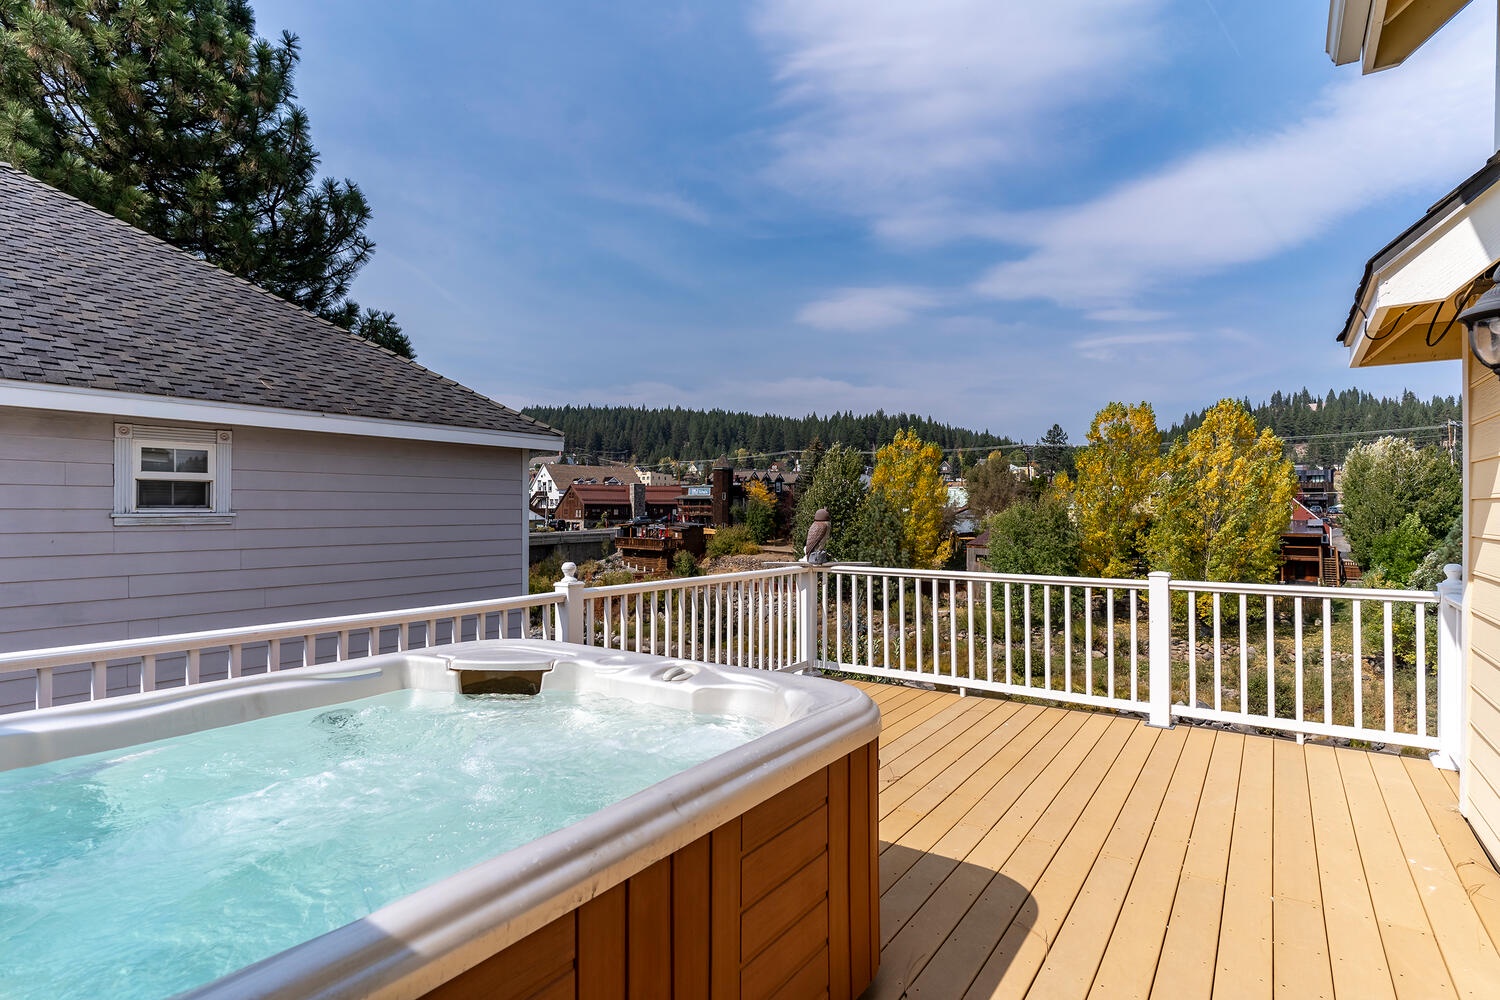 Master Bedroom Patio w/ Hot tub and View of River: Holy Cow Downtown Riverfront